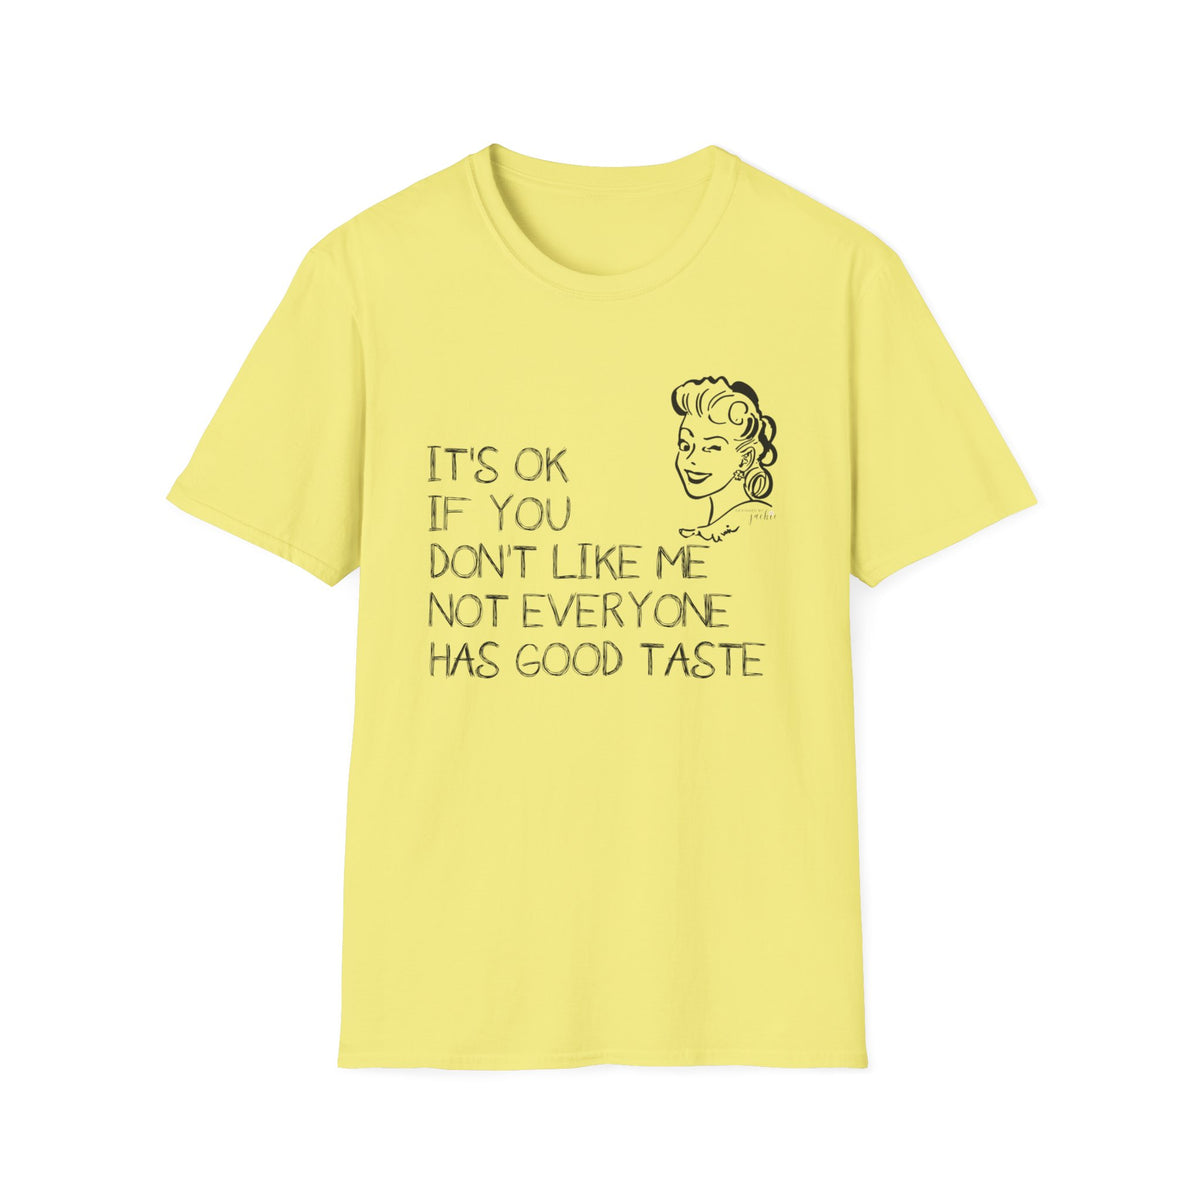 'It's OK if you don't like me' Unisex Softstyle T-Shirt